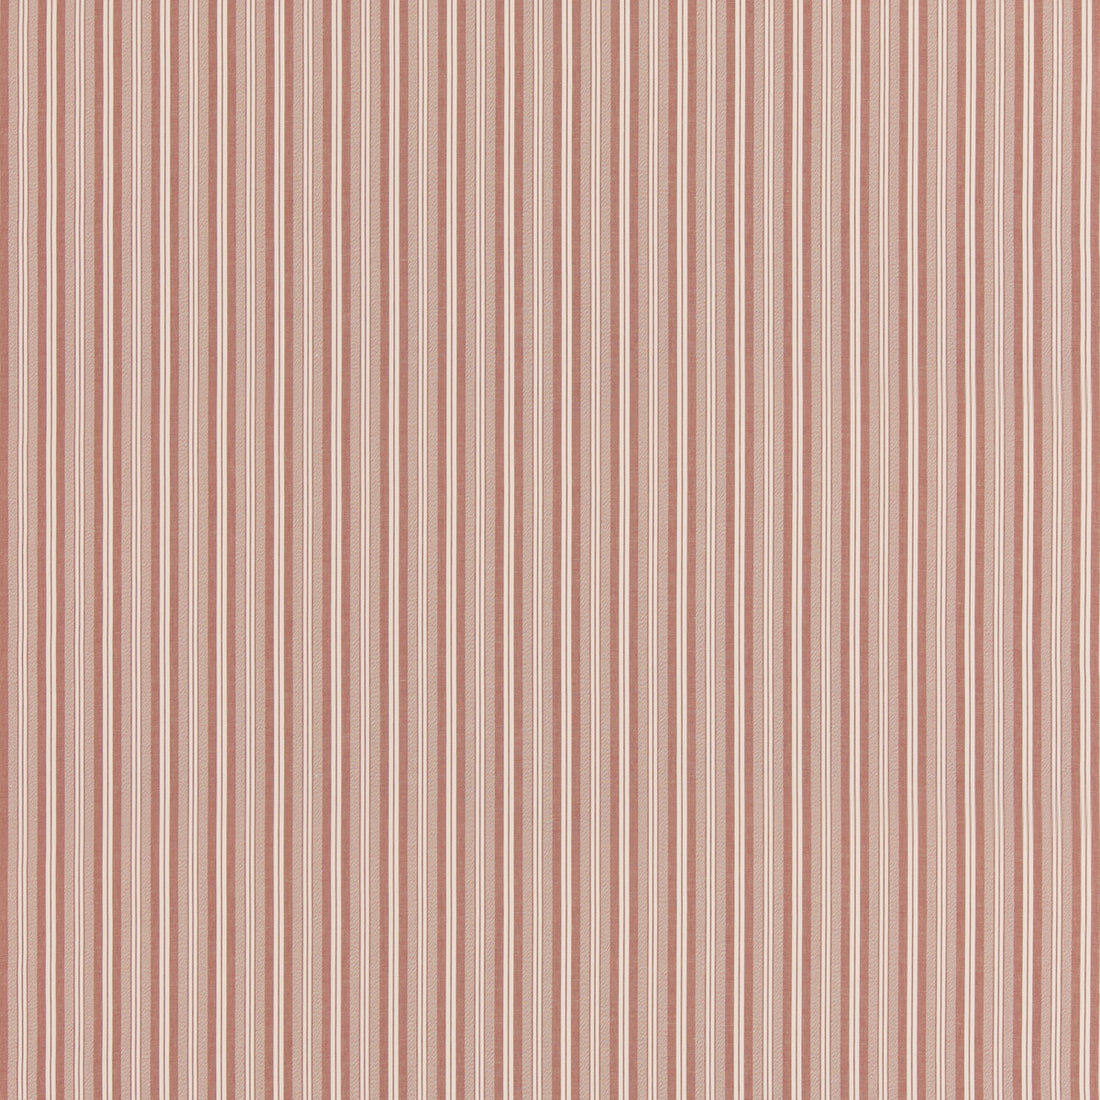 Laverton Stripe fabric in soft red color - pattern BF11037.450.0 - by G P &amp; J Baker in the Baker House Plain &amp; Stripe II collection